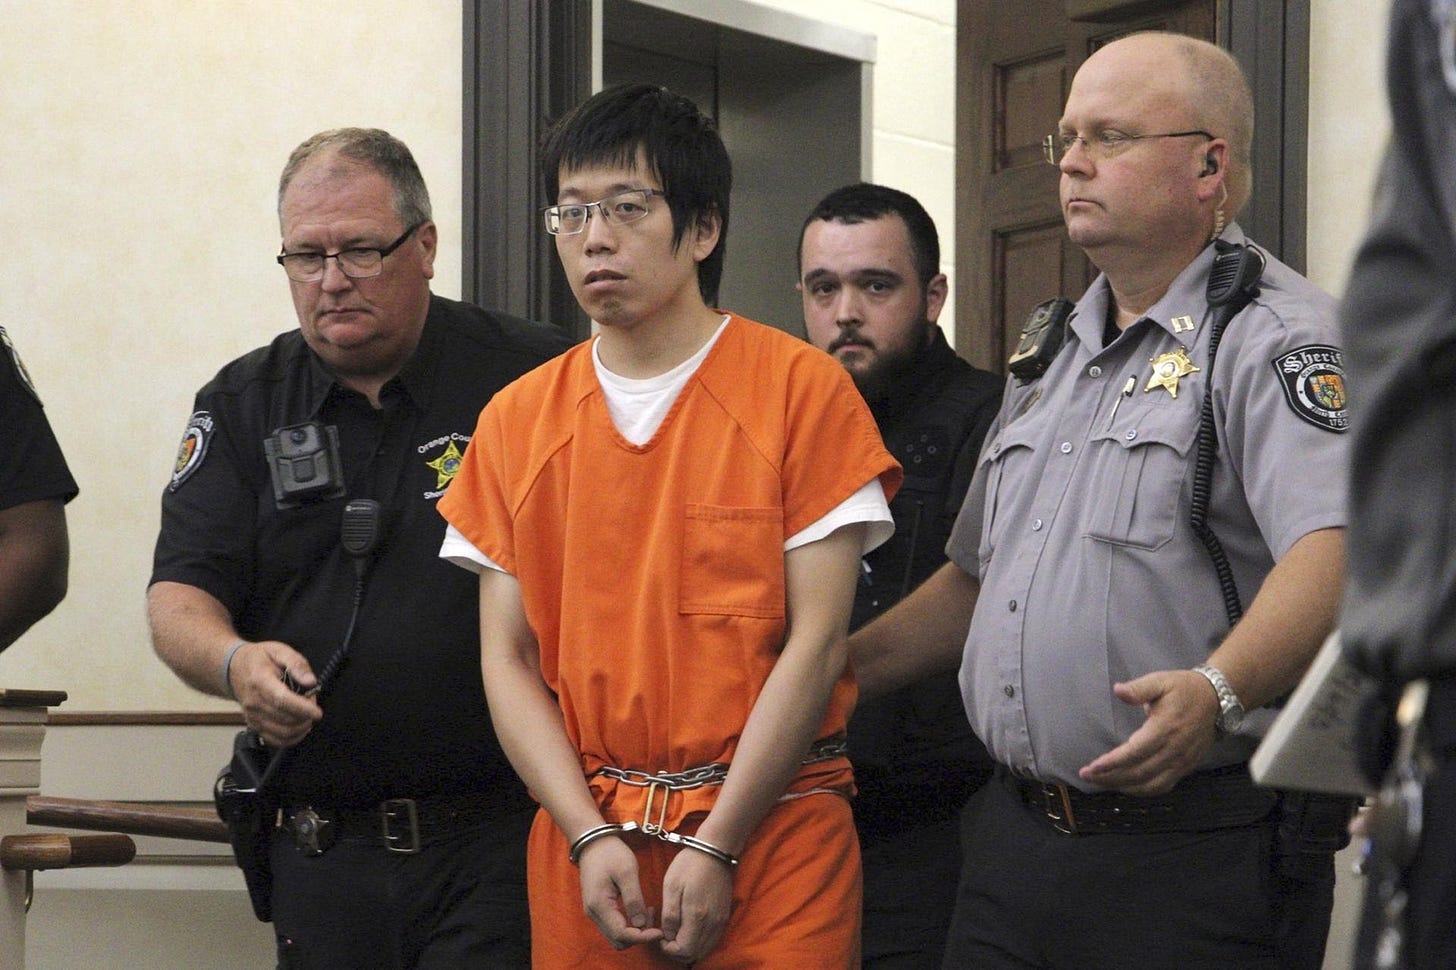 Tailei Qi, the suspect in the shooting at the University of North Carolina, makes his first appearance at the Orange County Courthouse, N.C.